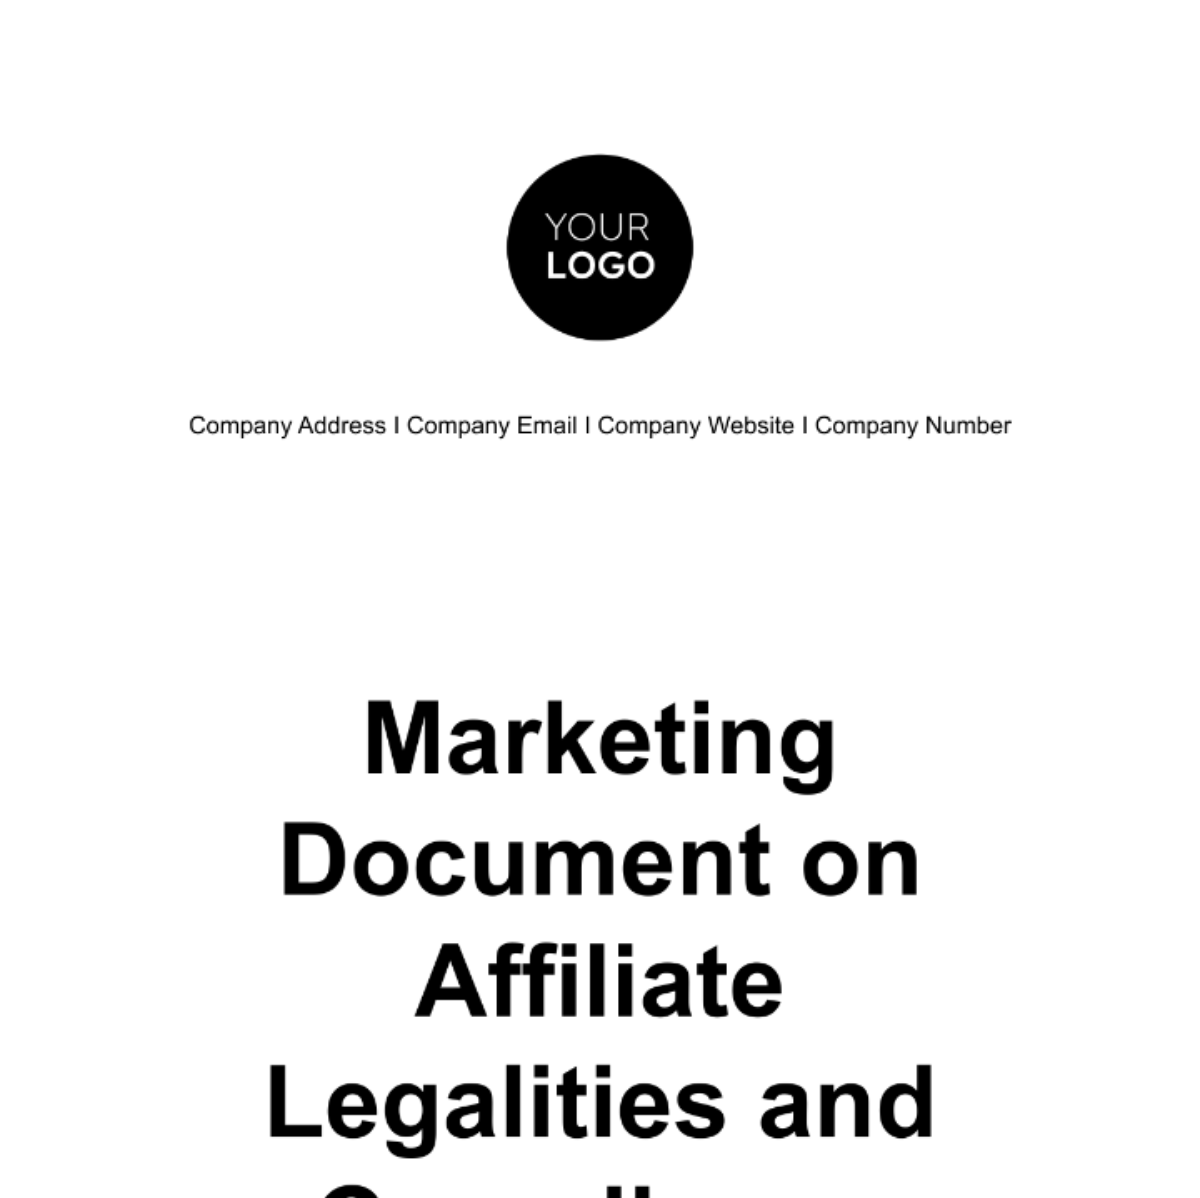 Marketing Document on Affiliate Legalities & Compliance Template